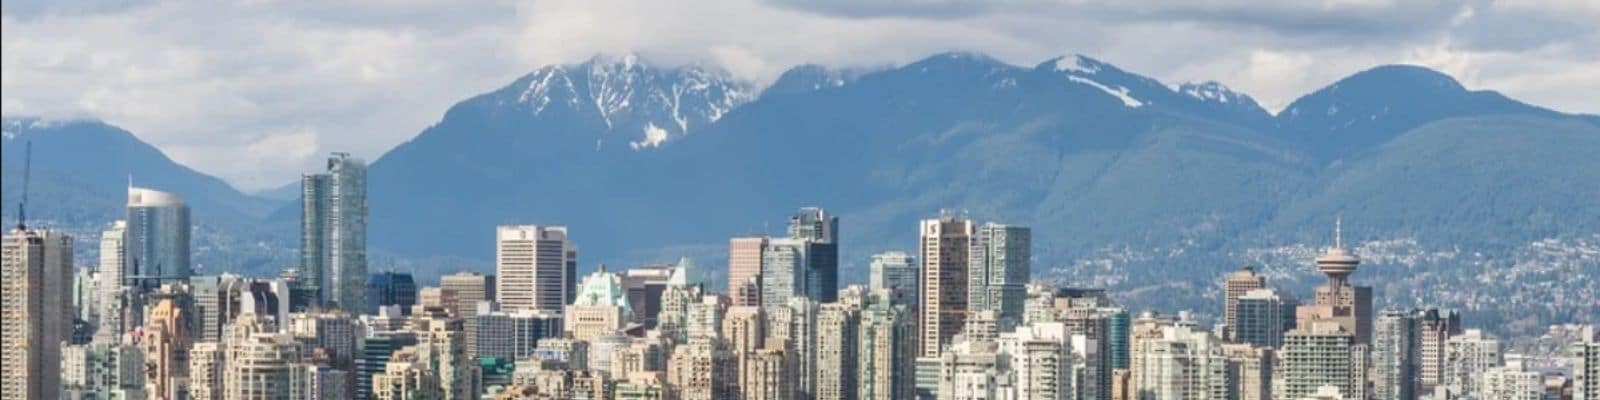 digital marketing courses in Vancouver